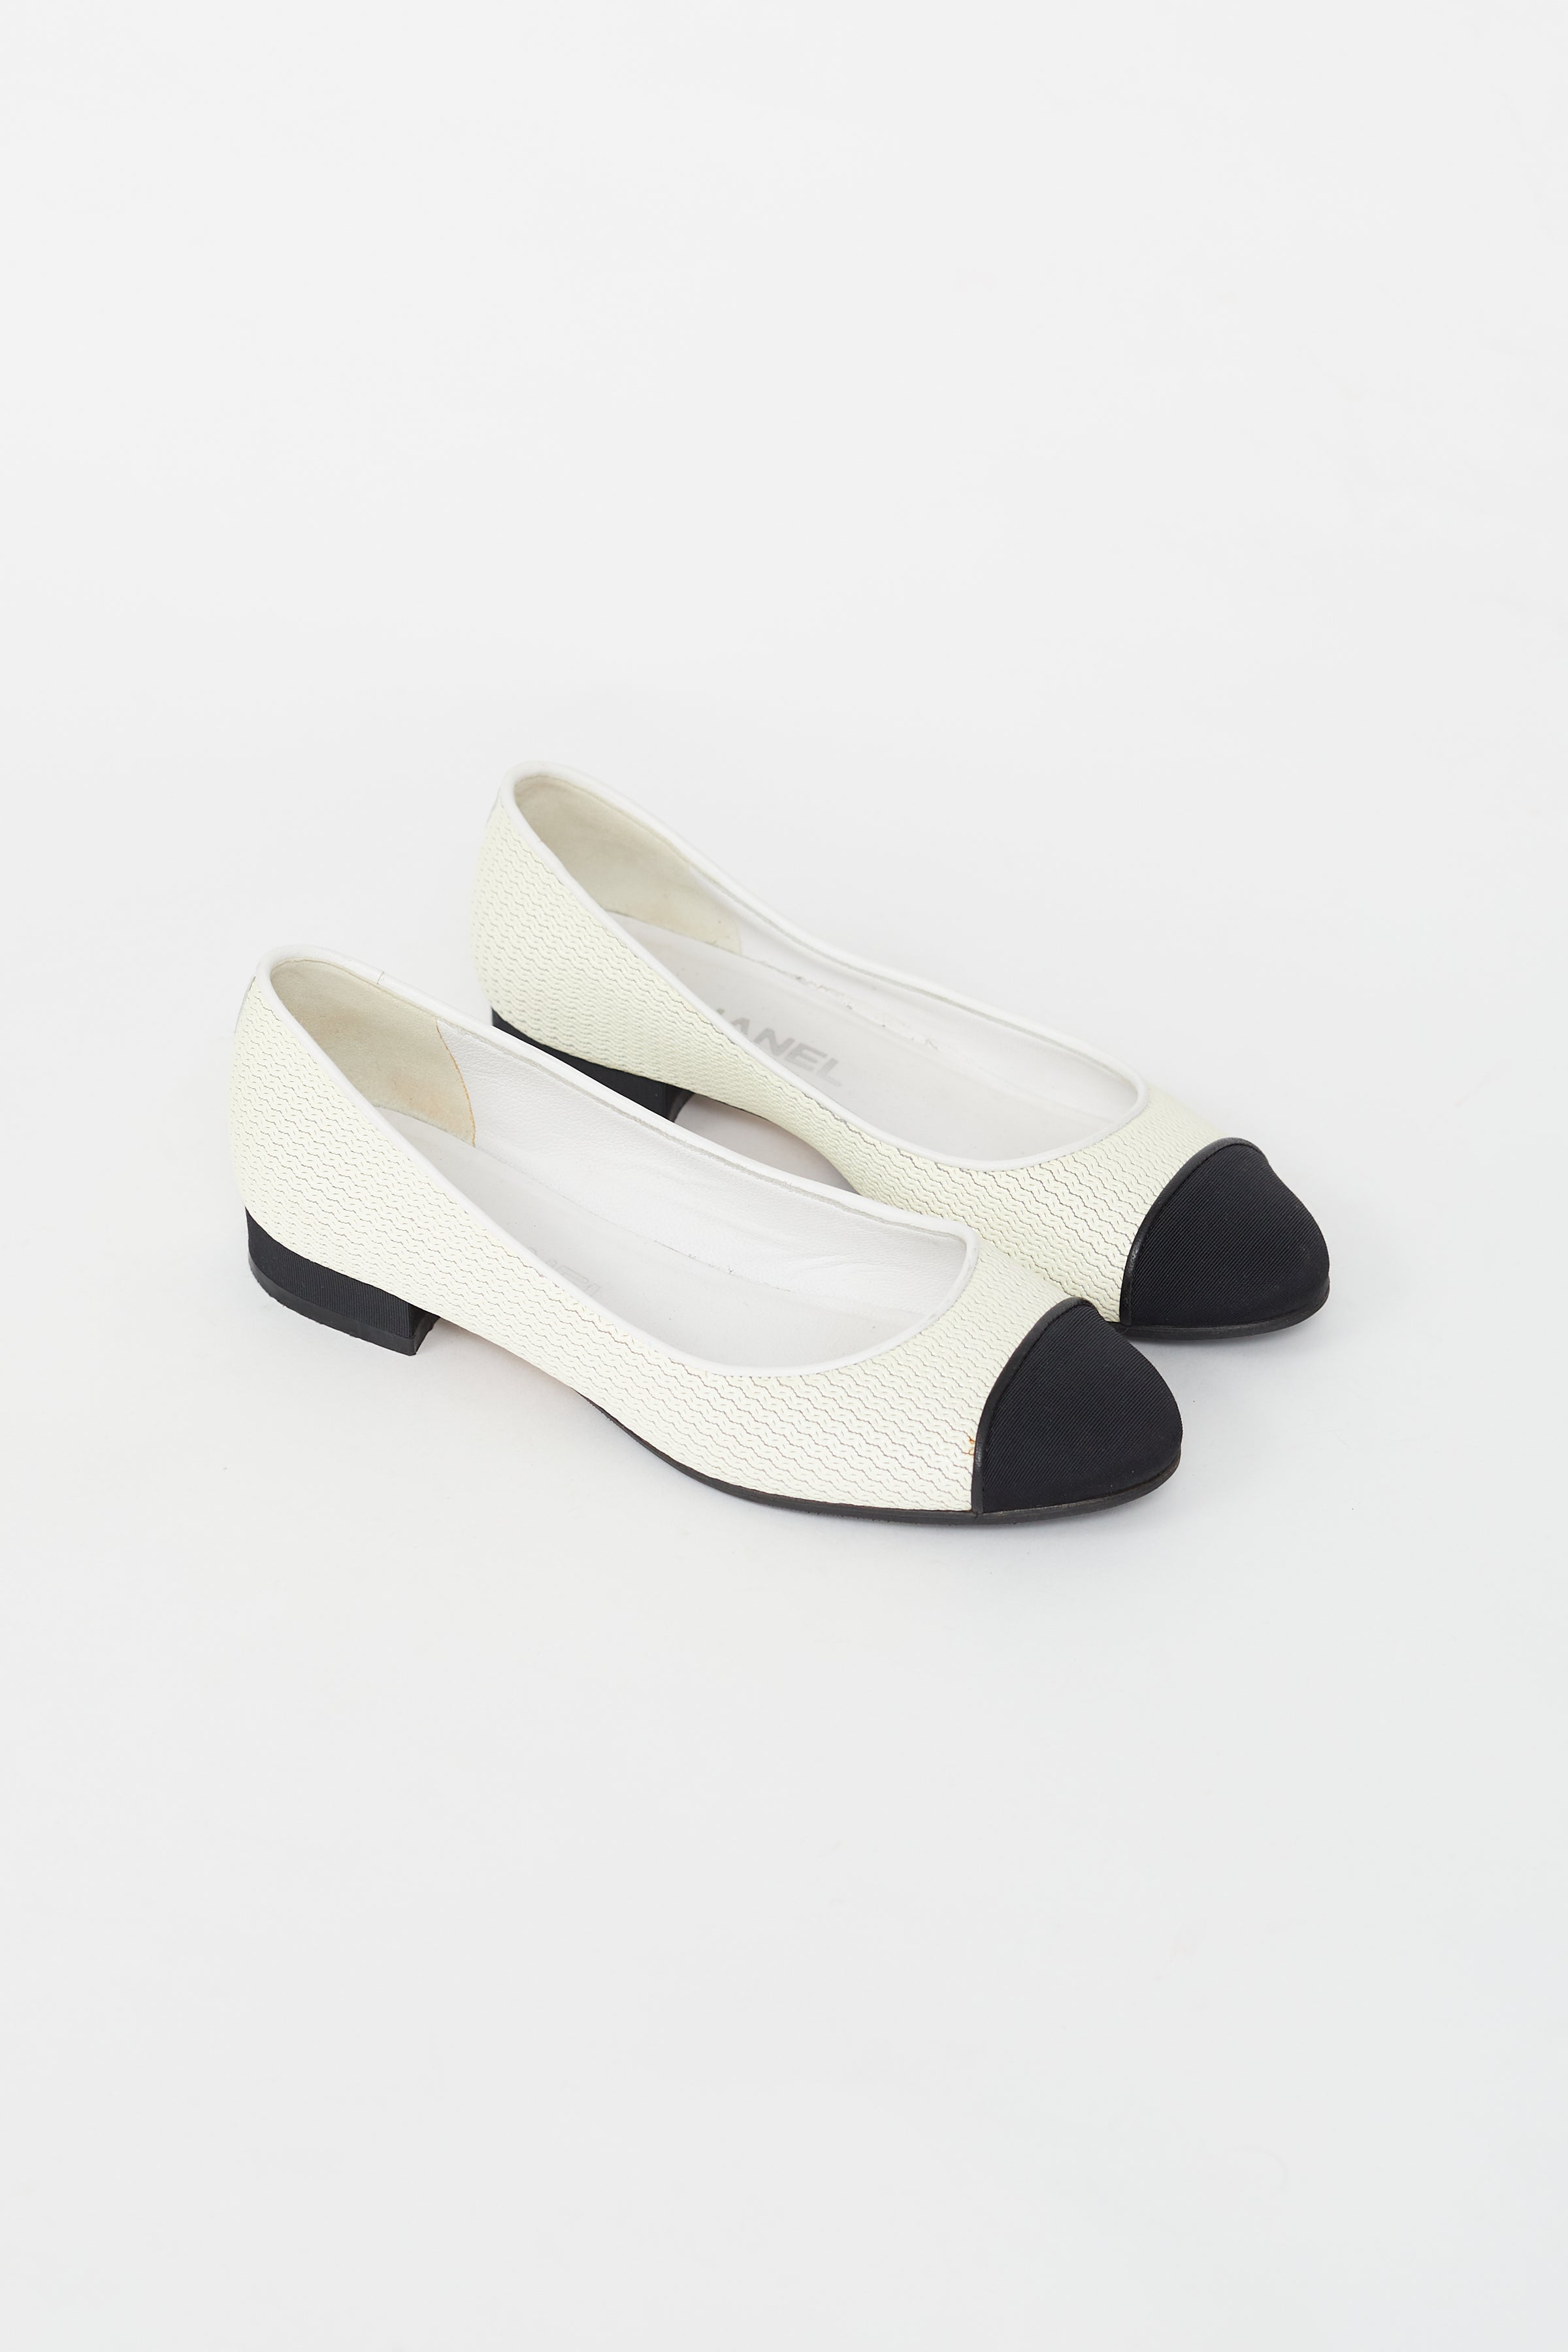 Chanel // Black and Cream Textured Leather Ballet Flat – VSP Consignment